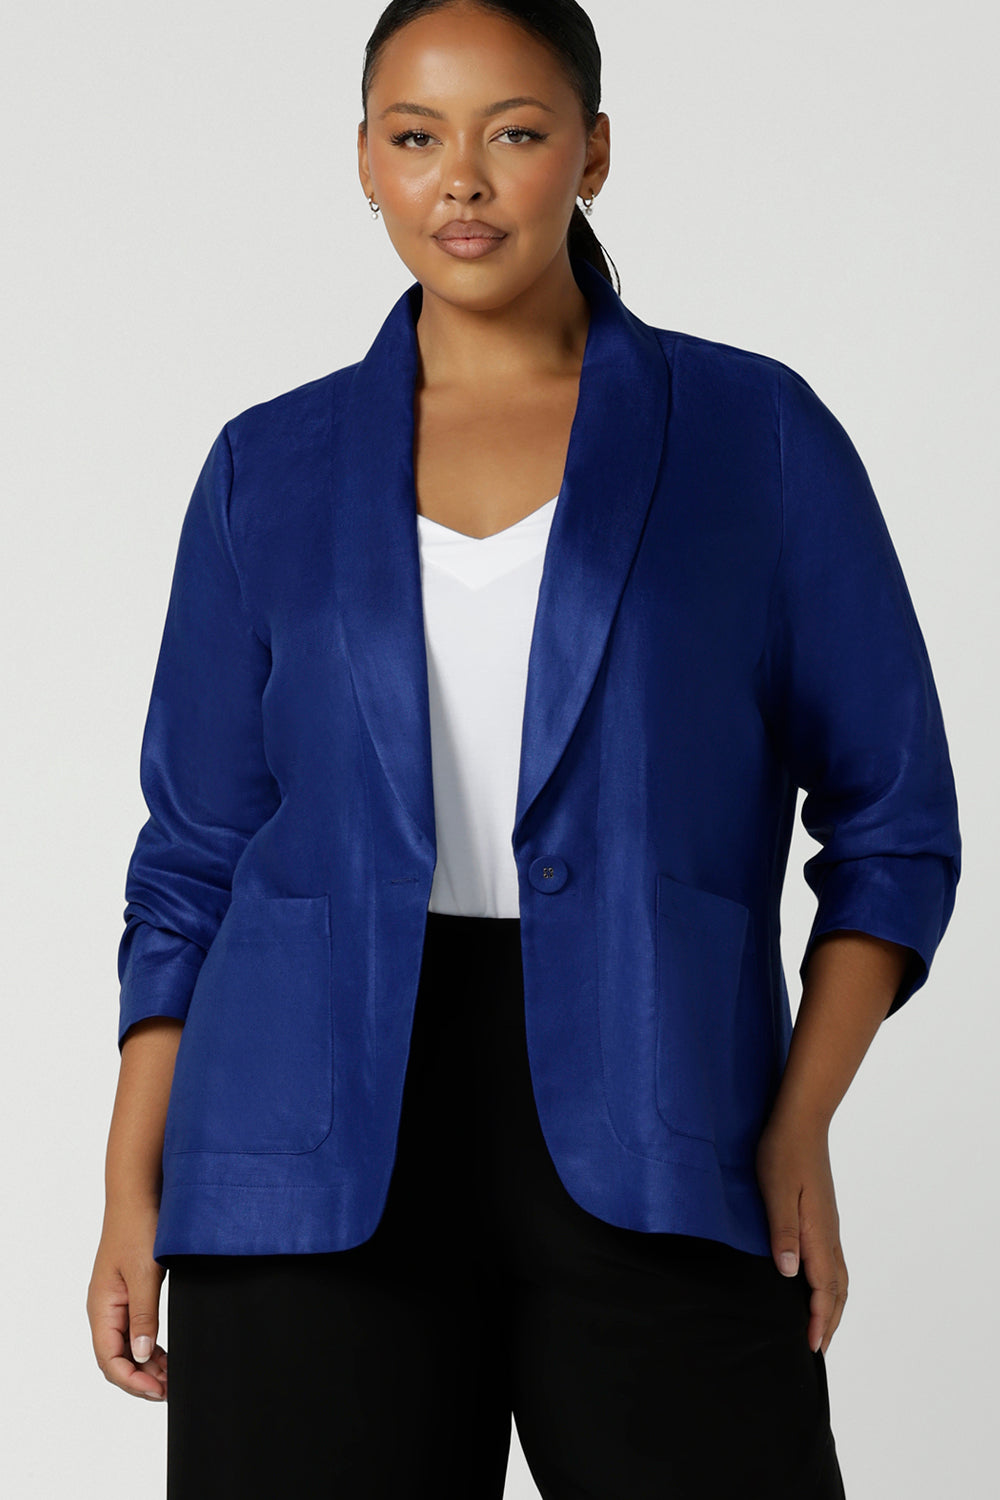 Houston Blazer in Cobalt Linen size 16. Softly tailored in Linen with front pockets and a functioning button front. Made in Australia for women size 8 - 24. Styled back with white Eddy cami top. 